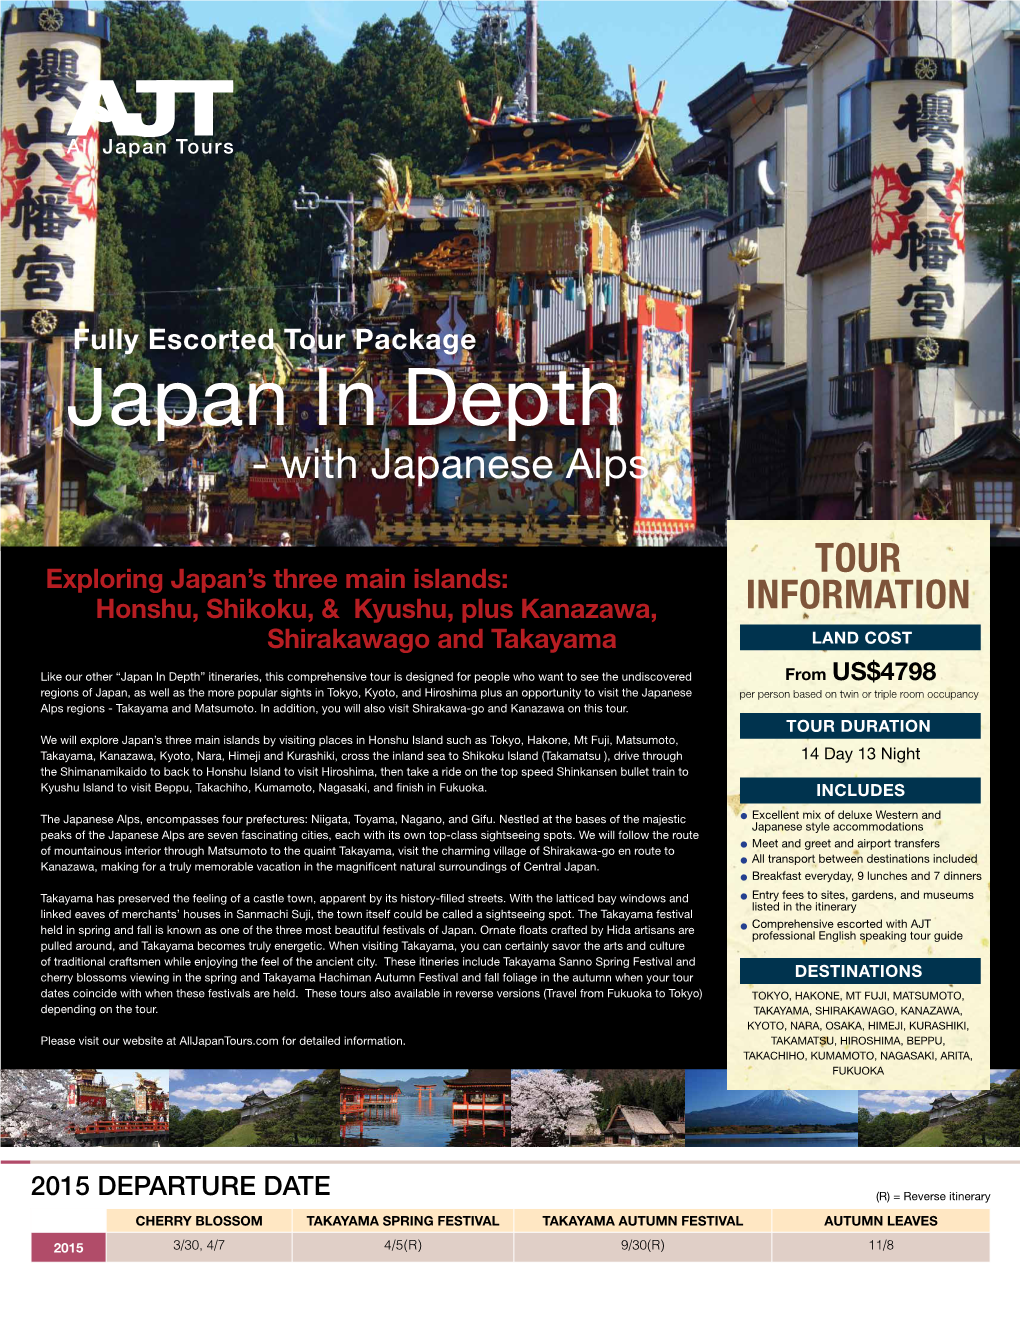 Japan in Depth - with Japanese Alps